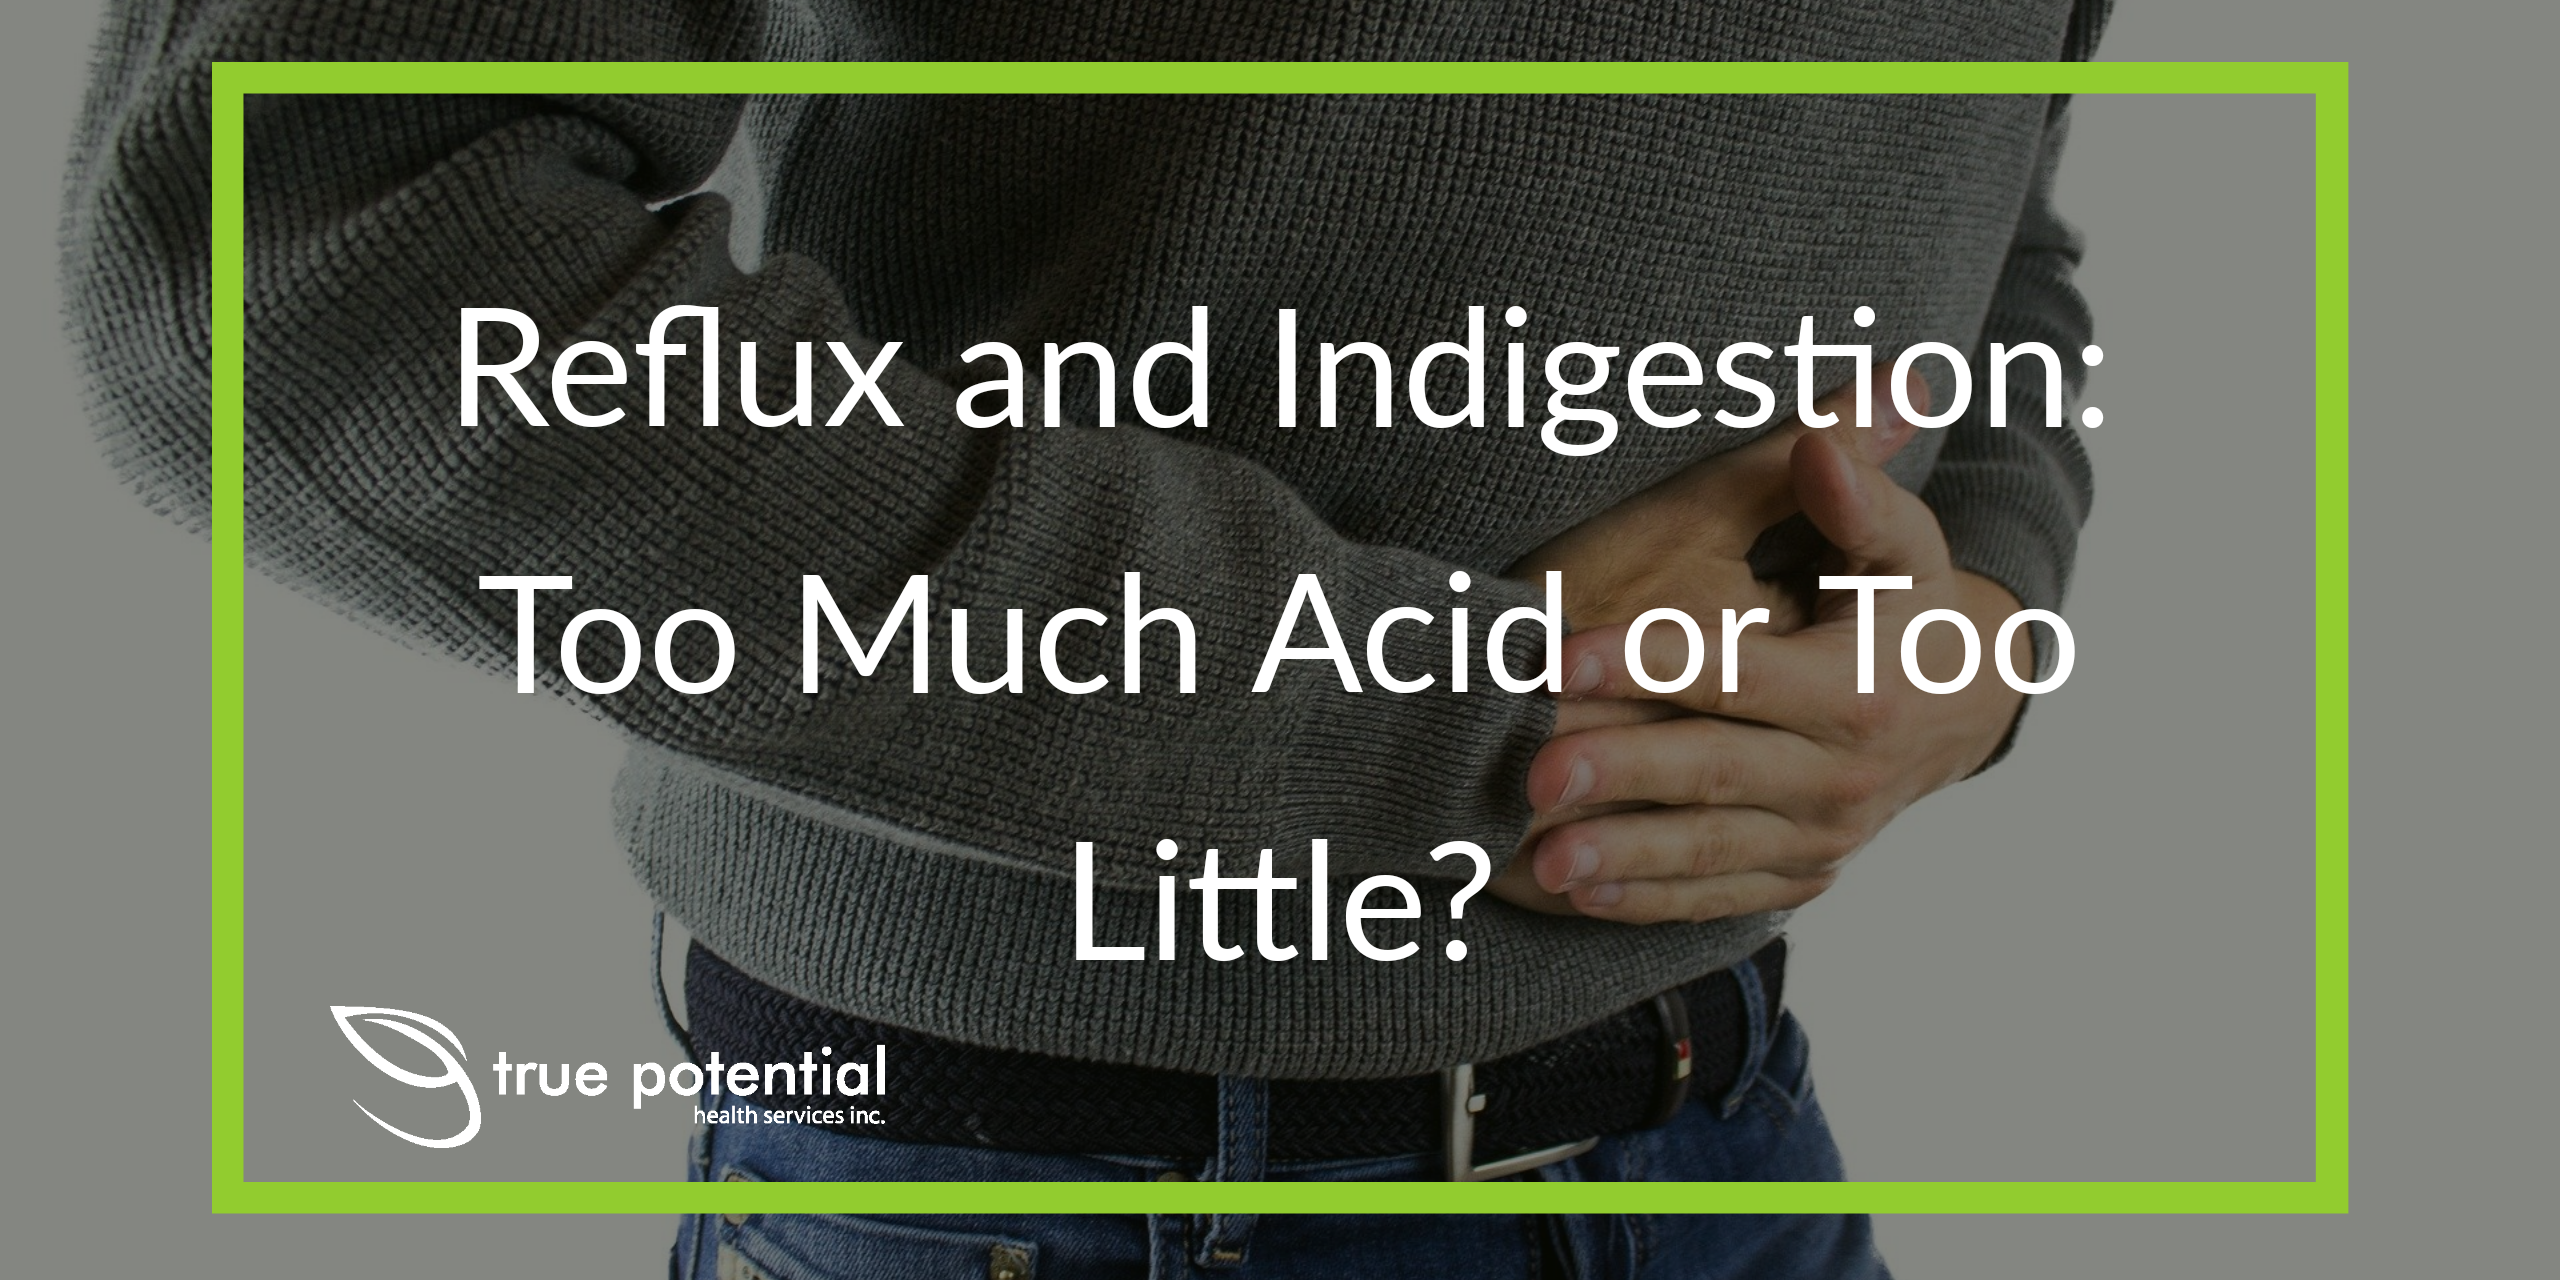 Too little stomach acid can cause stomach issues and pain